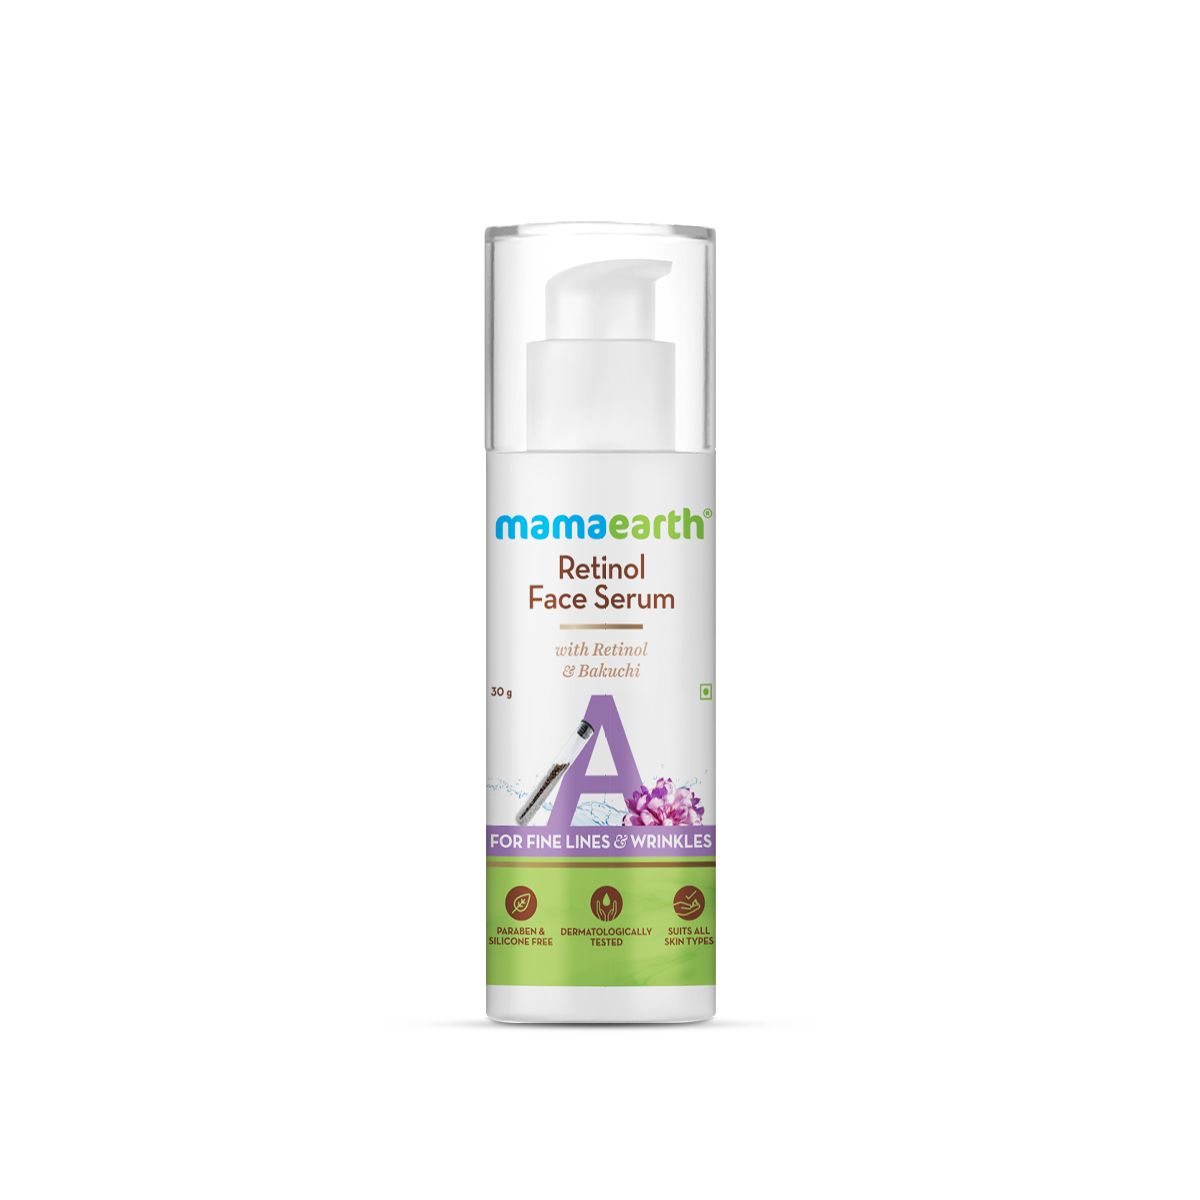 Mamaearth Retinol Face Serum Better Than Others Available in The Market